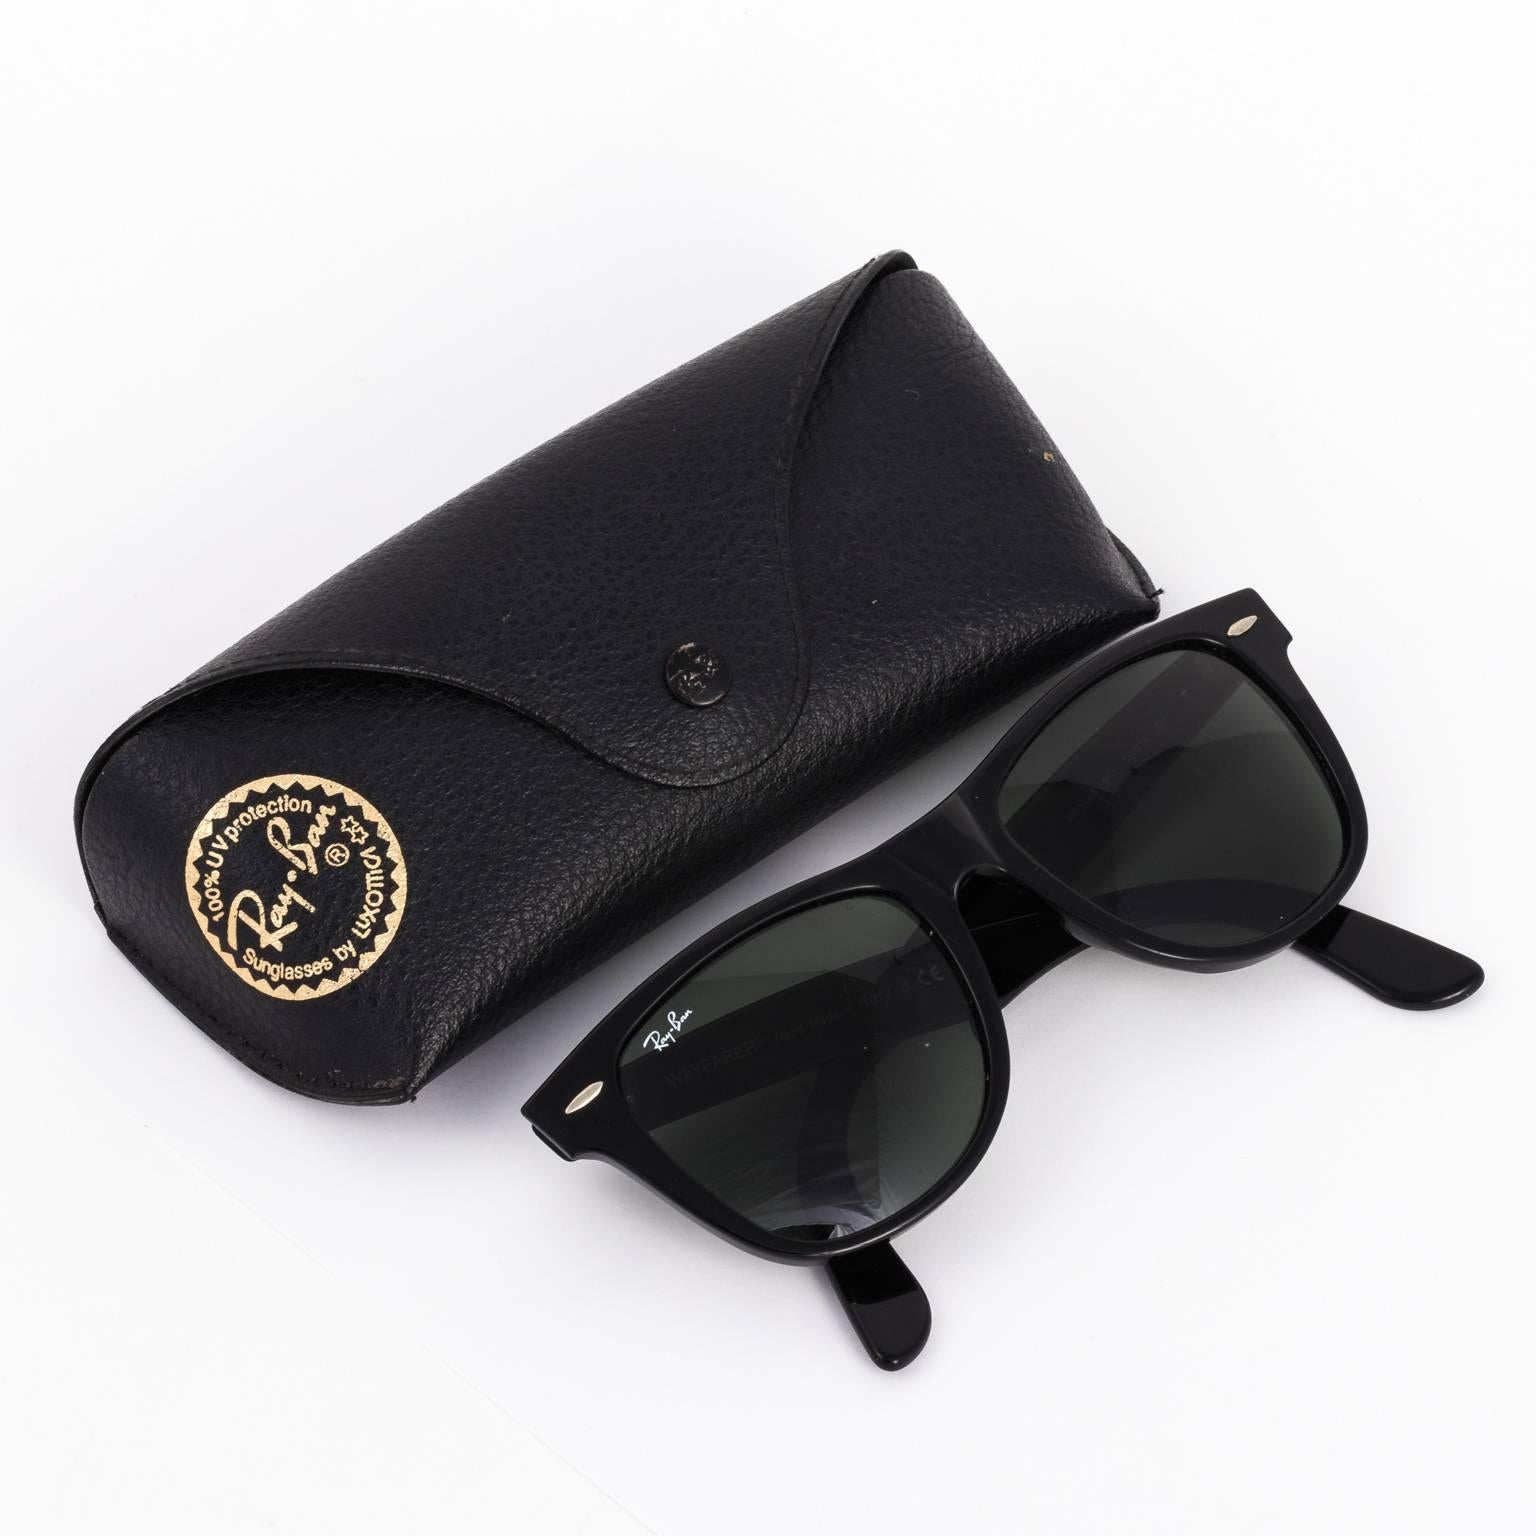 Contemporary set of black Ray-Ban sunglasses with matching soft leather case.